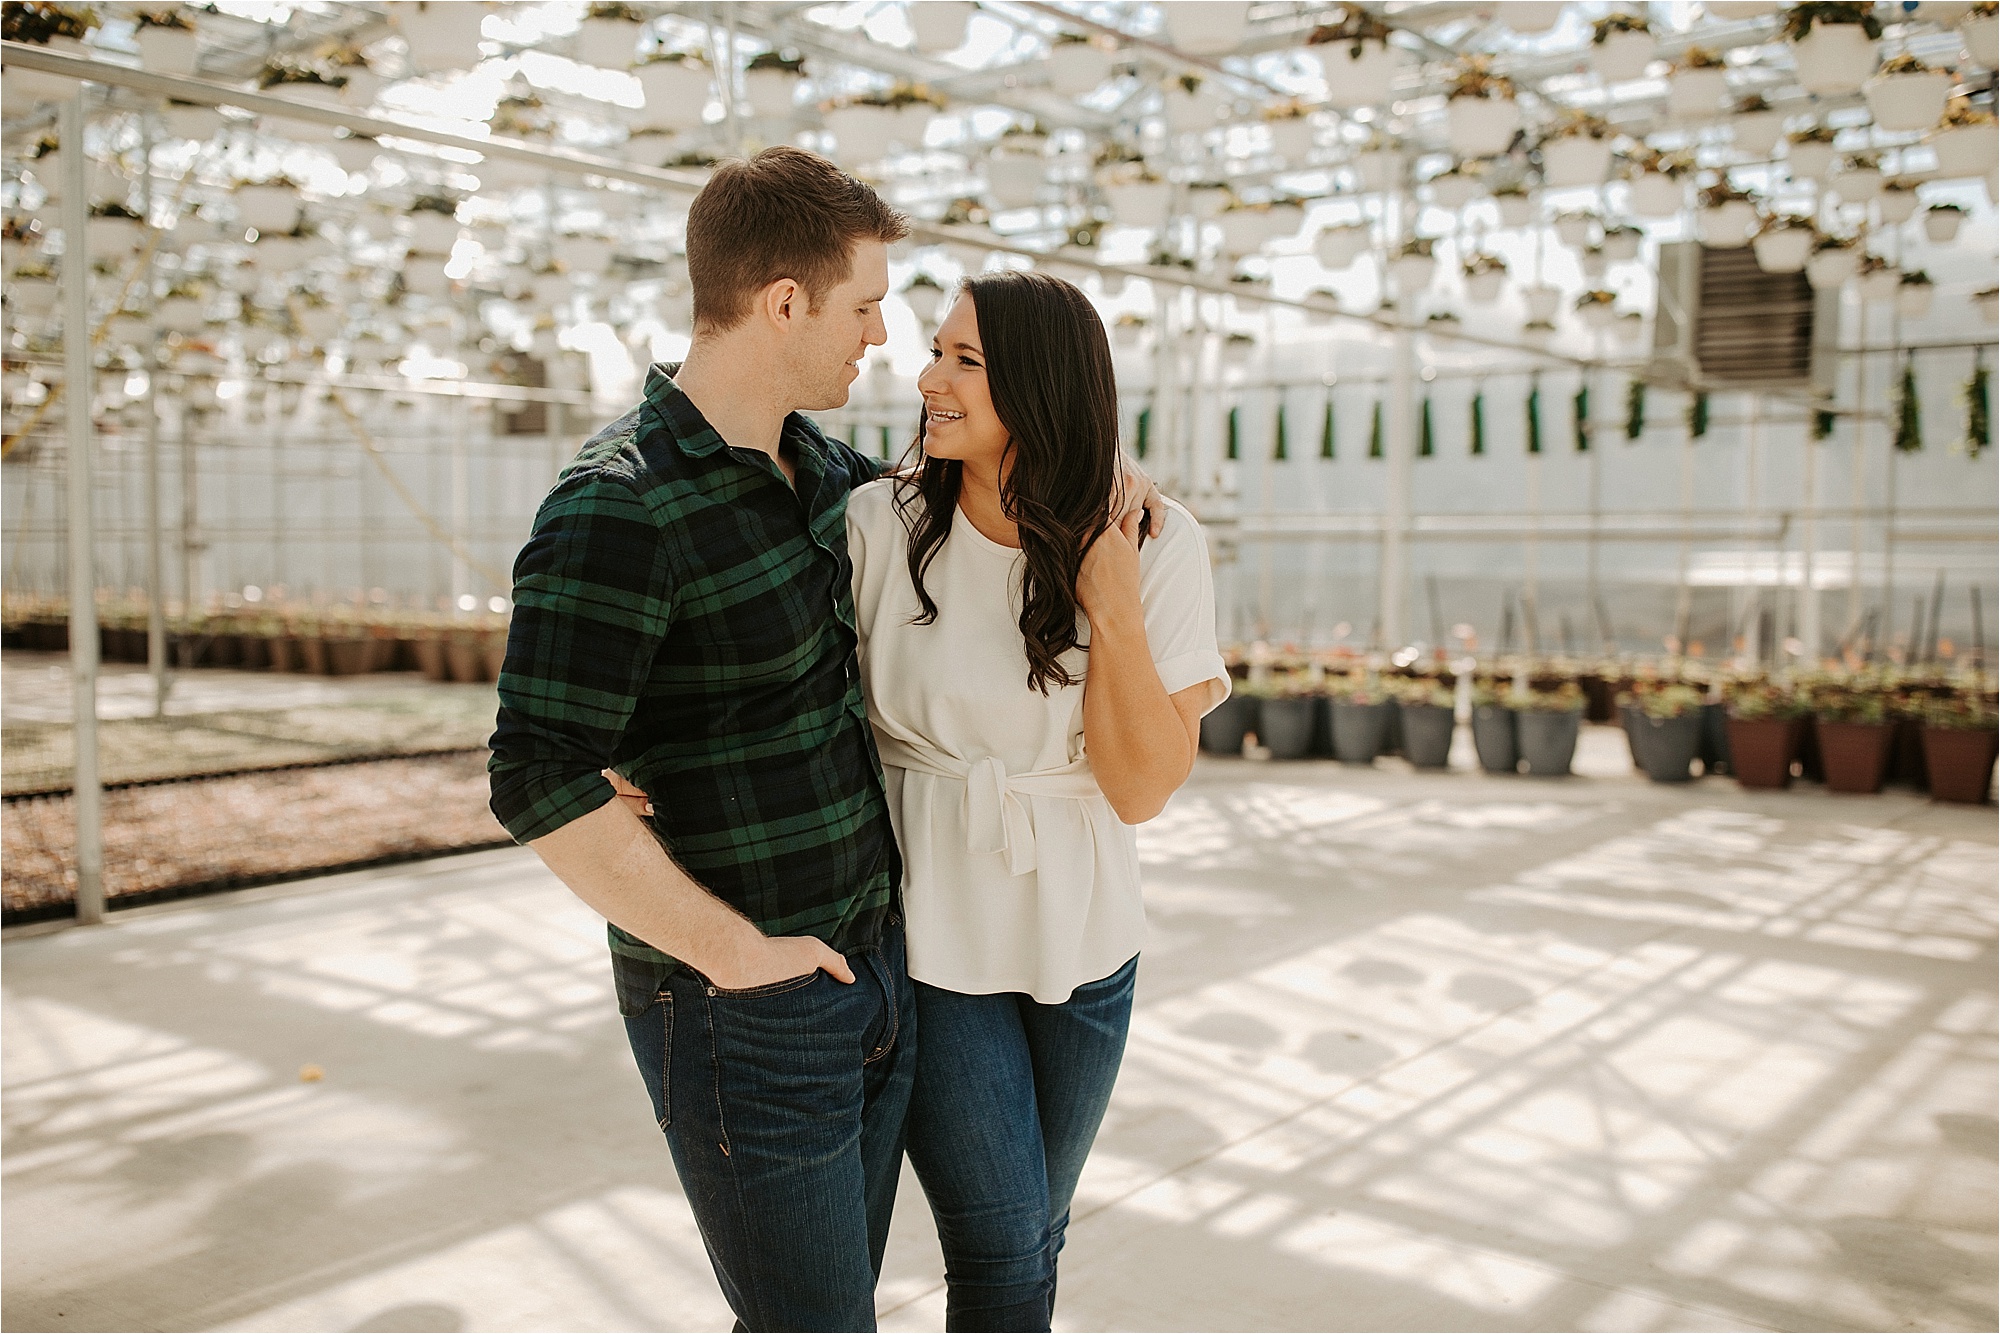 Greenhouse-engagement-session-in-Grant-Park-IL.-Krystal-Richmond-is-a-Chicagoland-Wedding-Photographer.